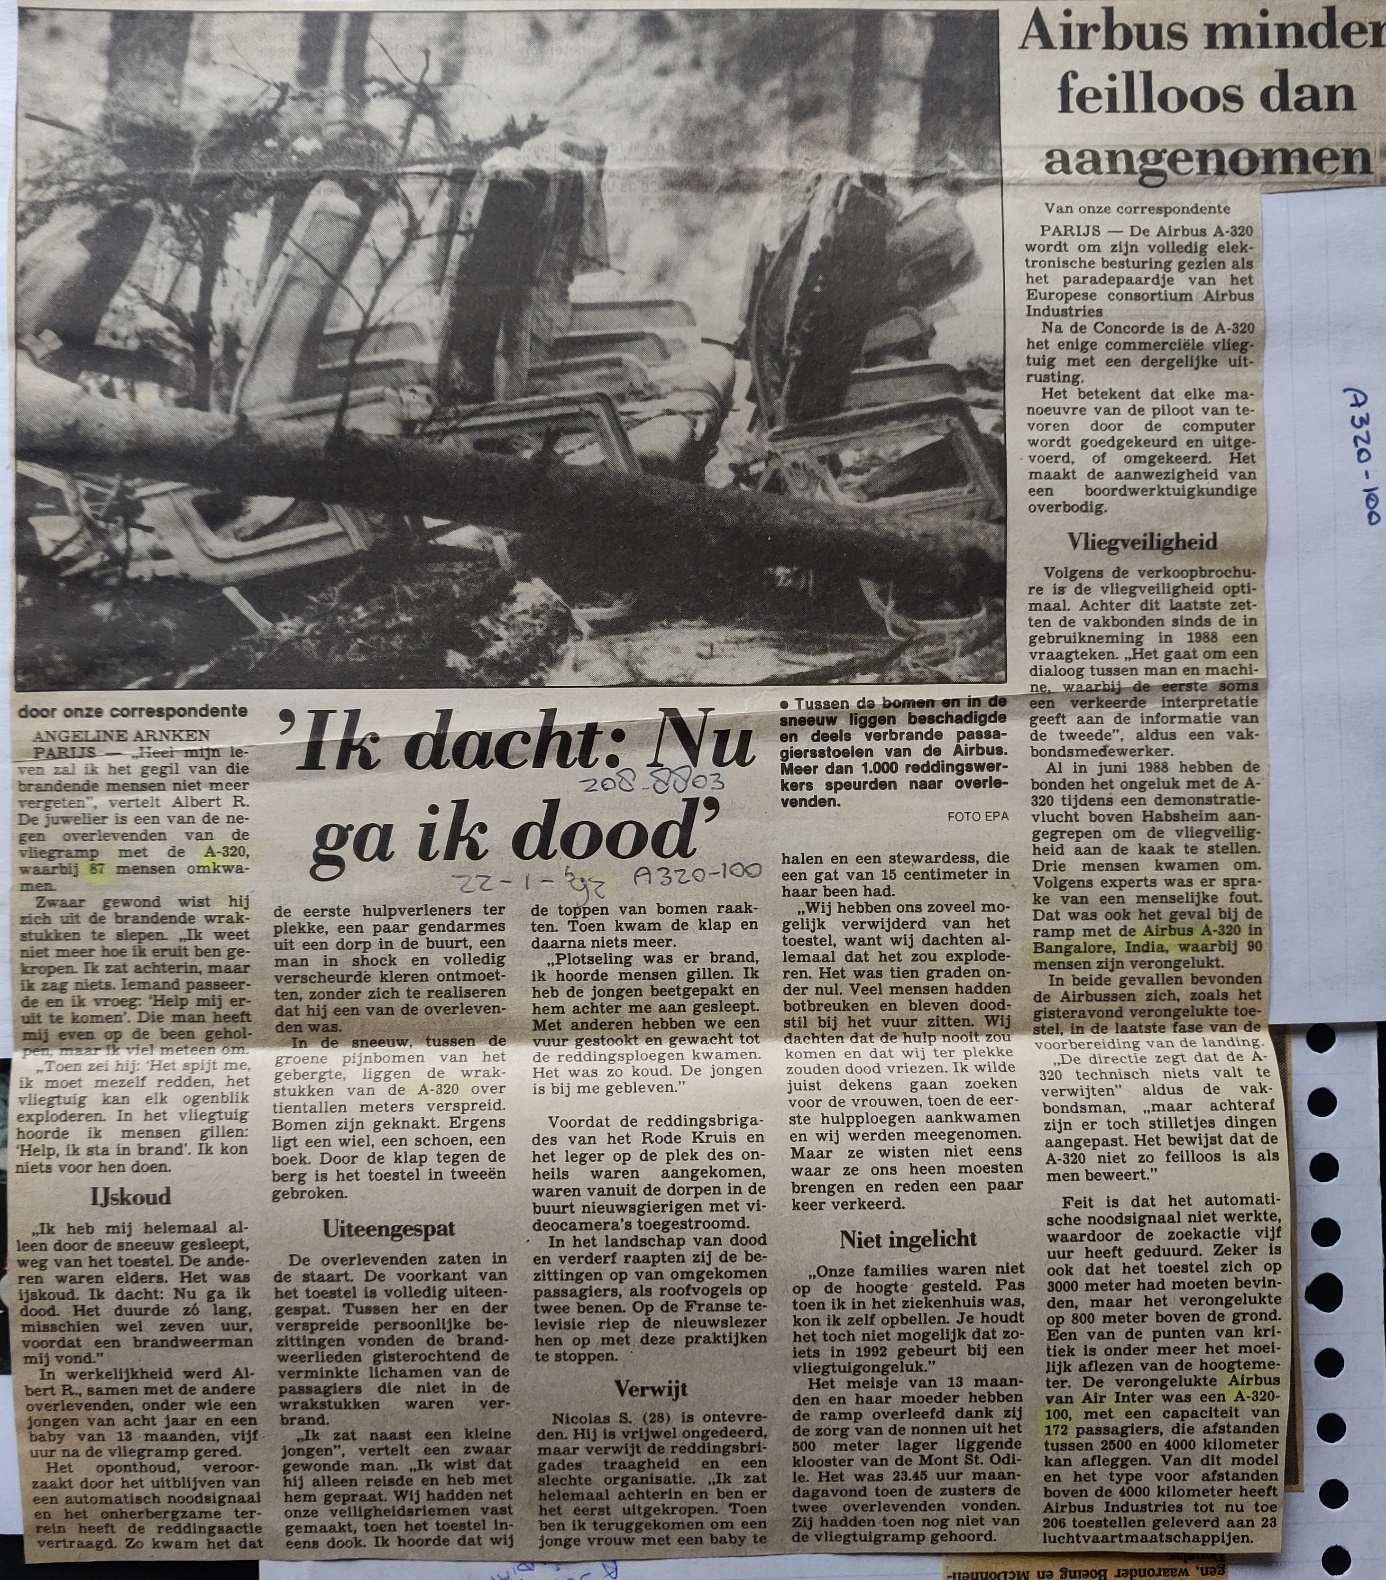 Airbus A320-111 newspaper article 22 January 1992 discription of the Air Inter crash near St.Odile, France